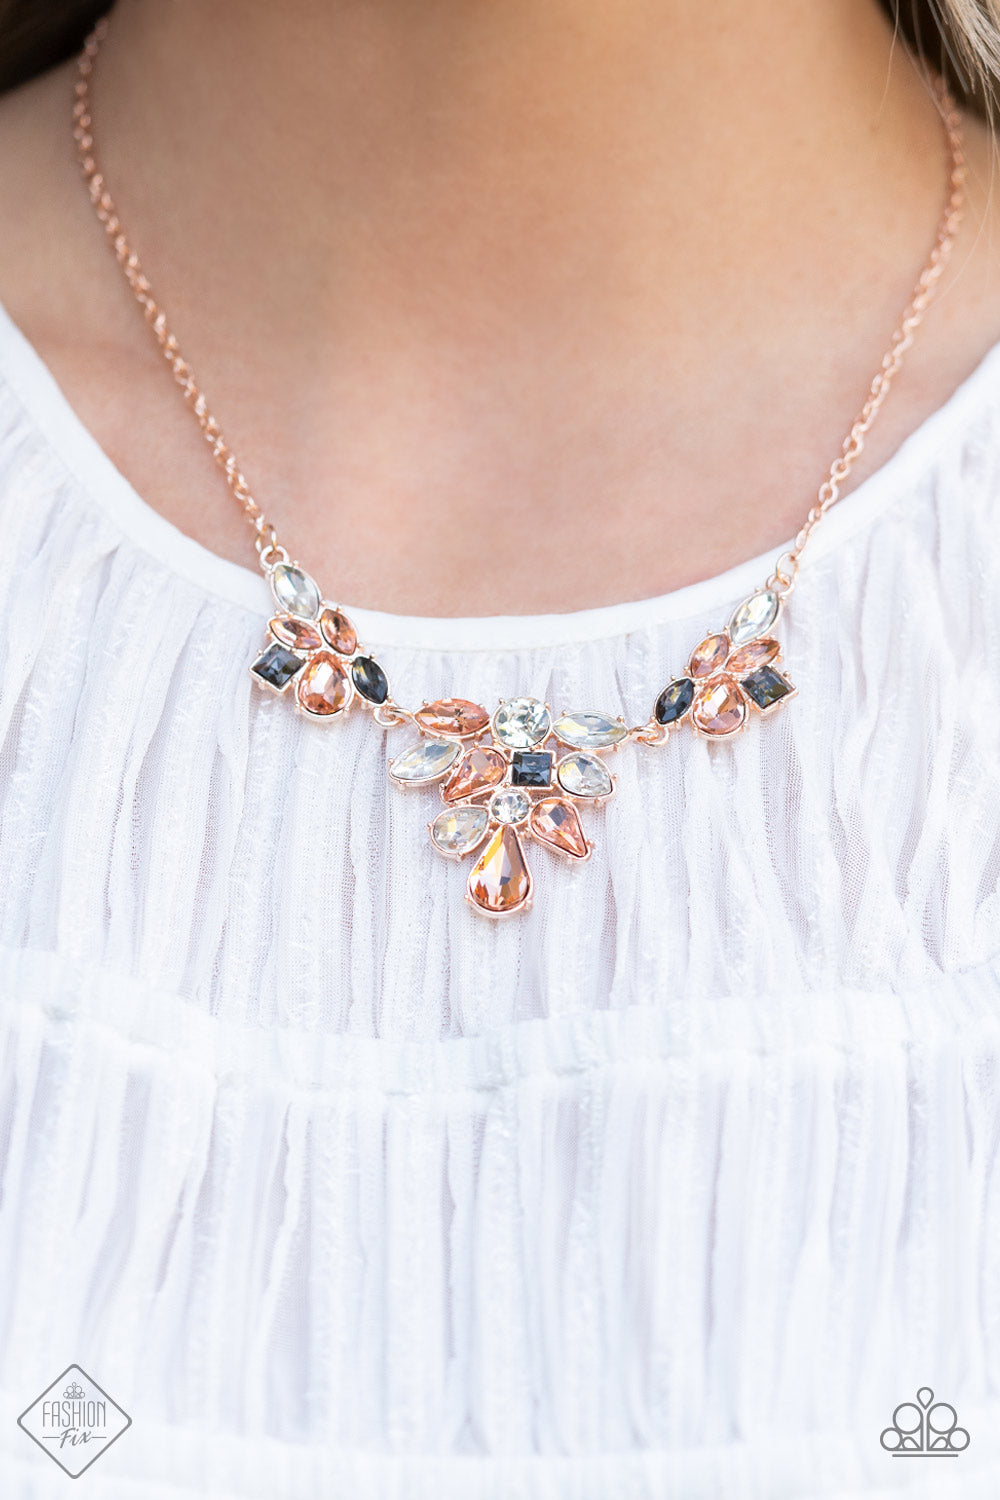 Completely Captivated - Rose Gold Necklace  - Fashion Fix